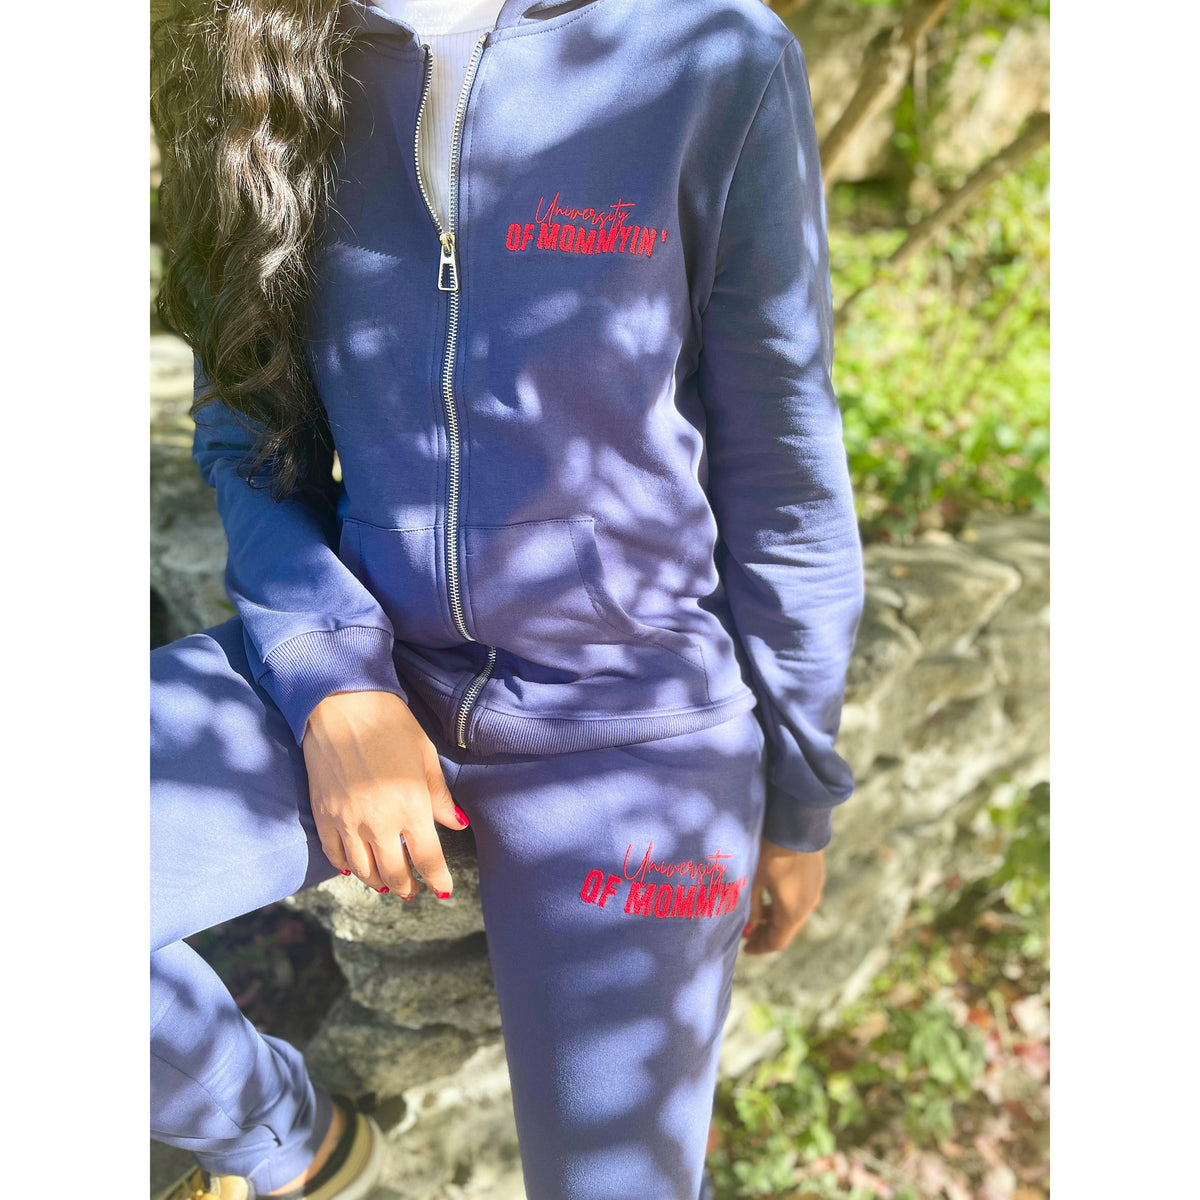 University of Mommyin Zip Up Sweatsuit - Navy and Red